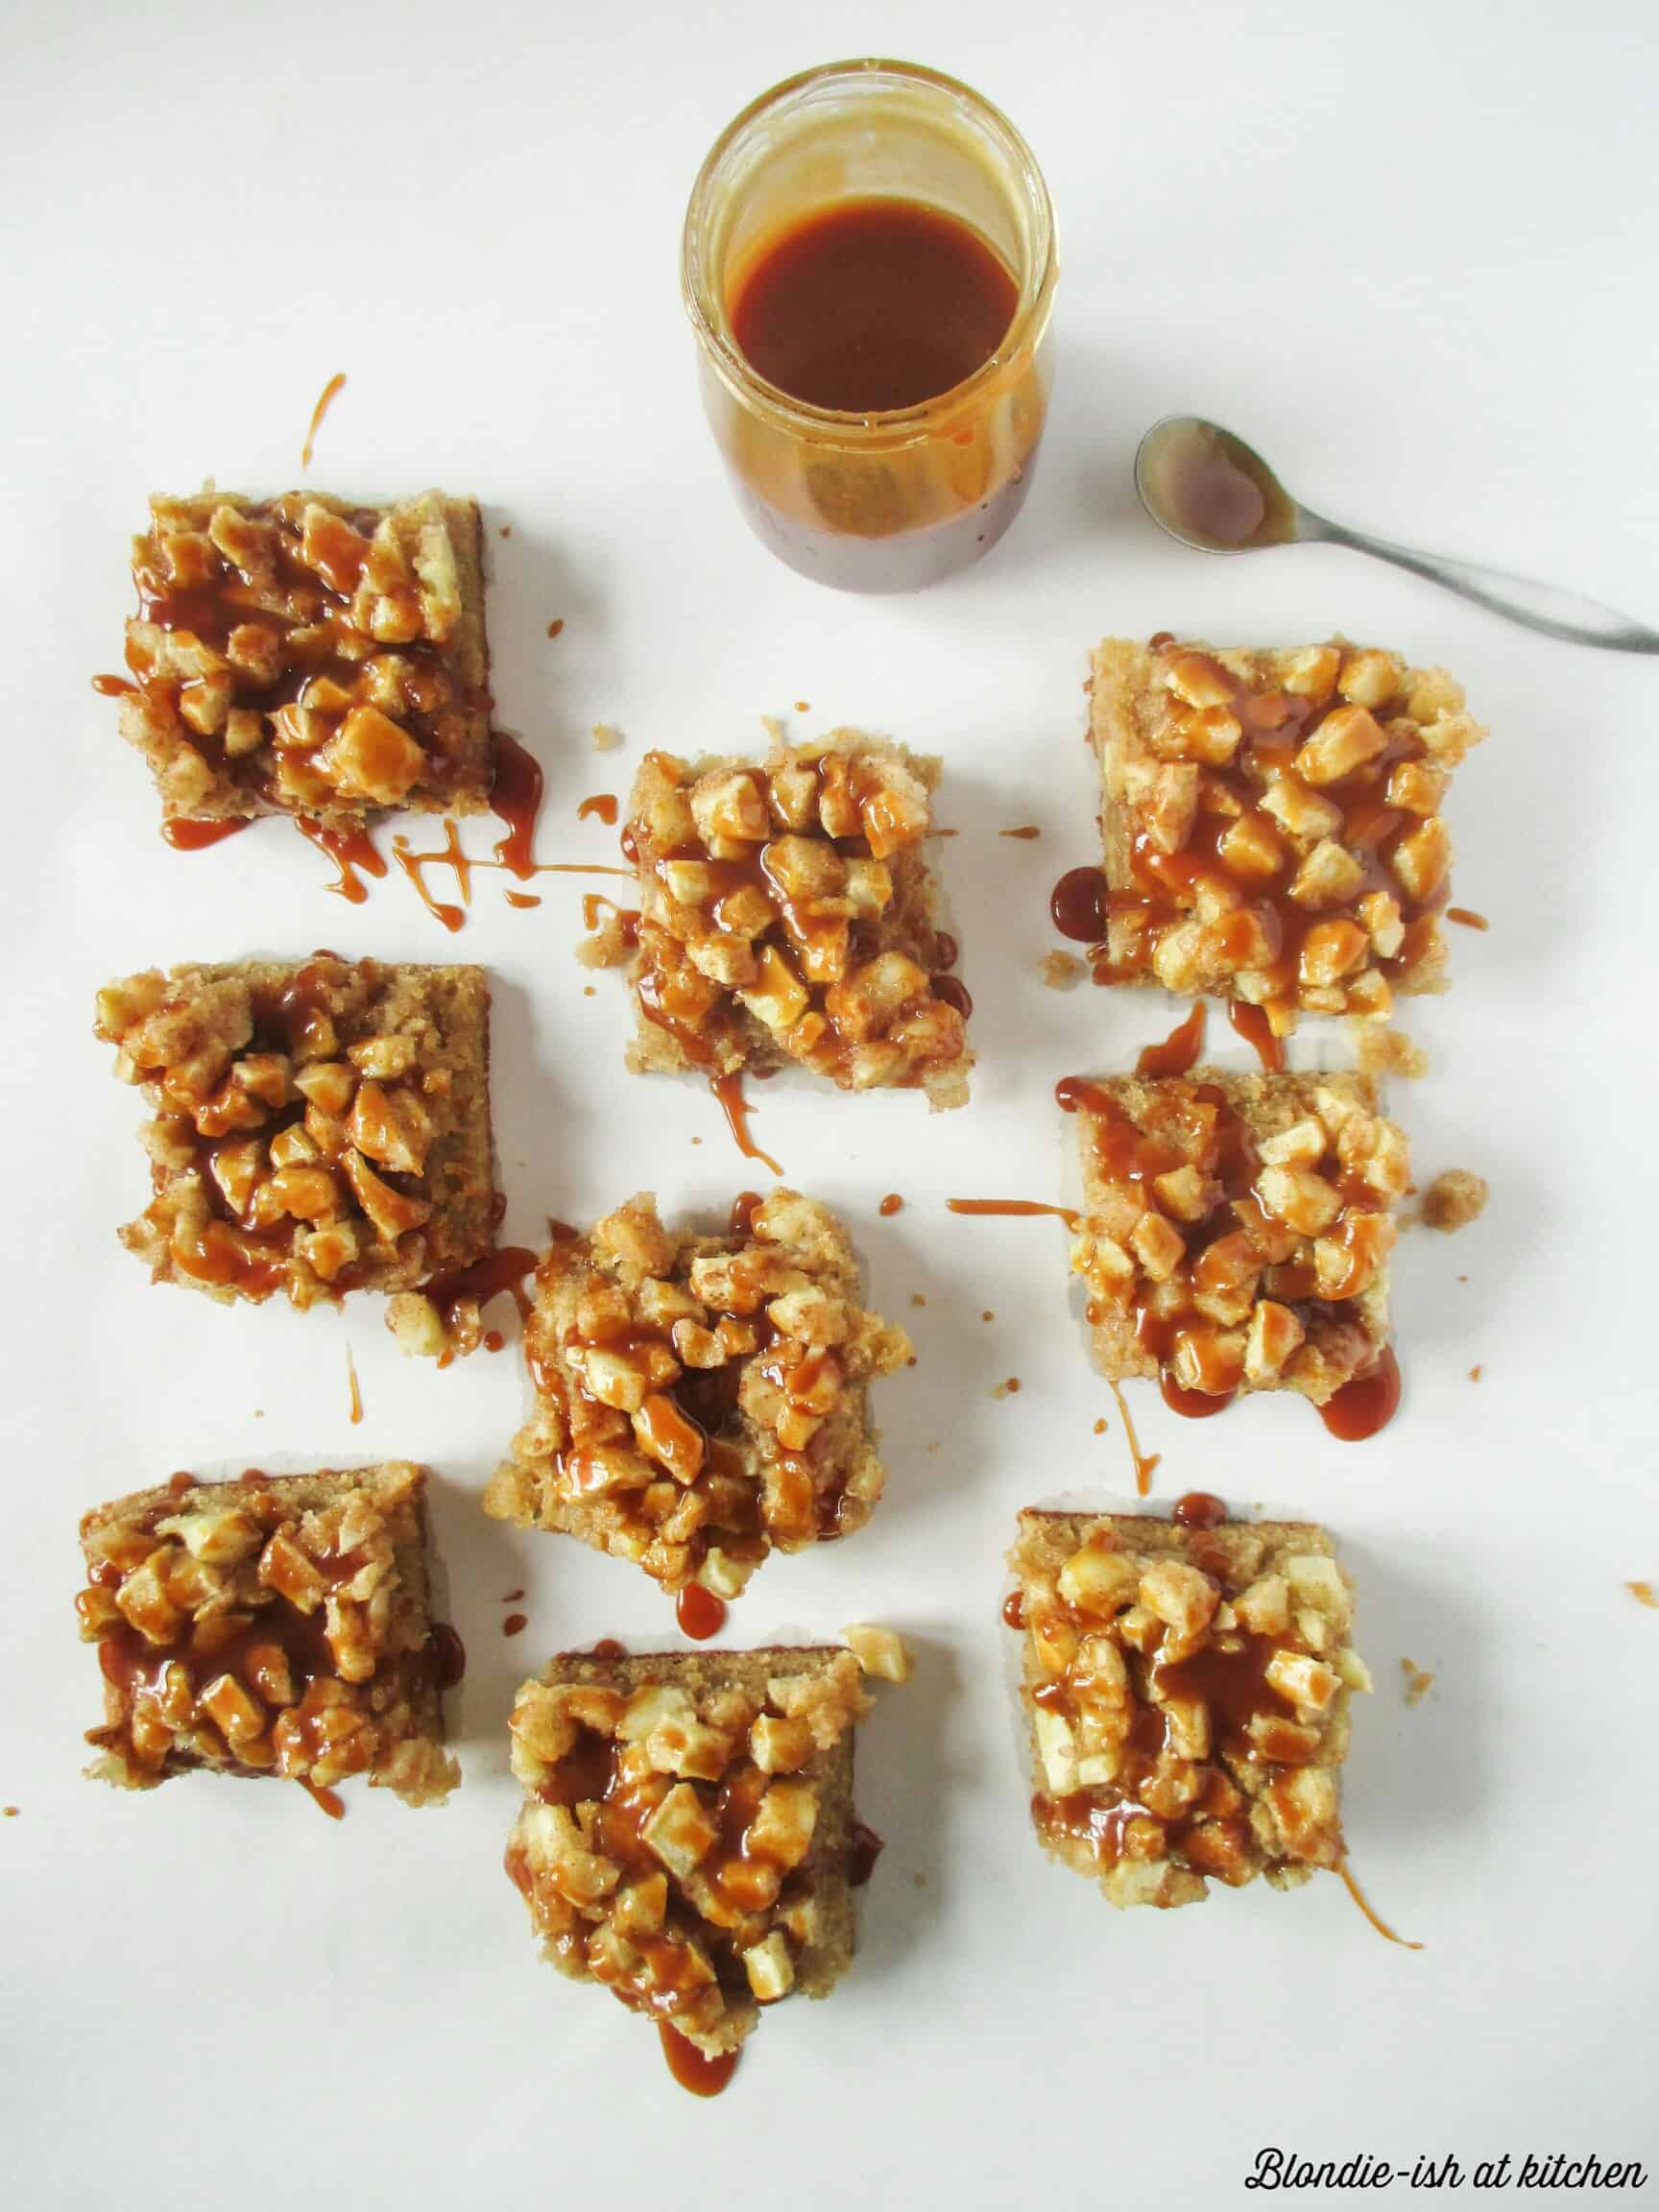 peanut-butter-bars-with-apple-and-salted-caramel